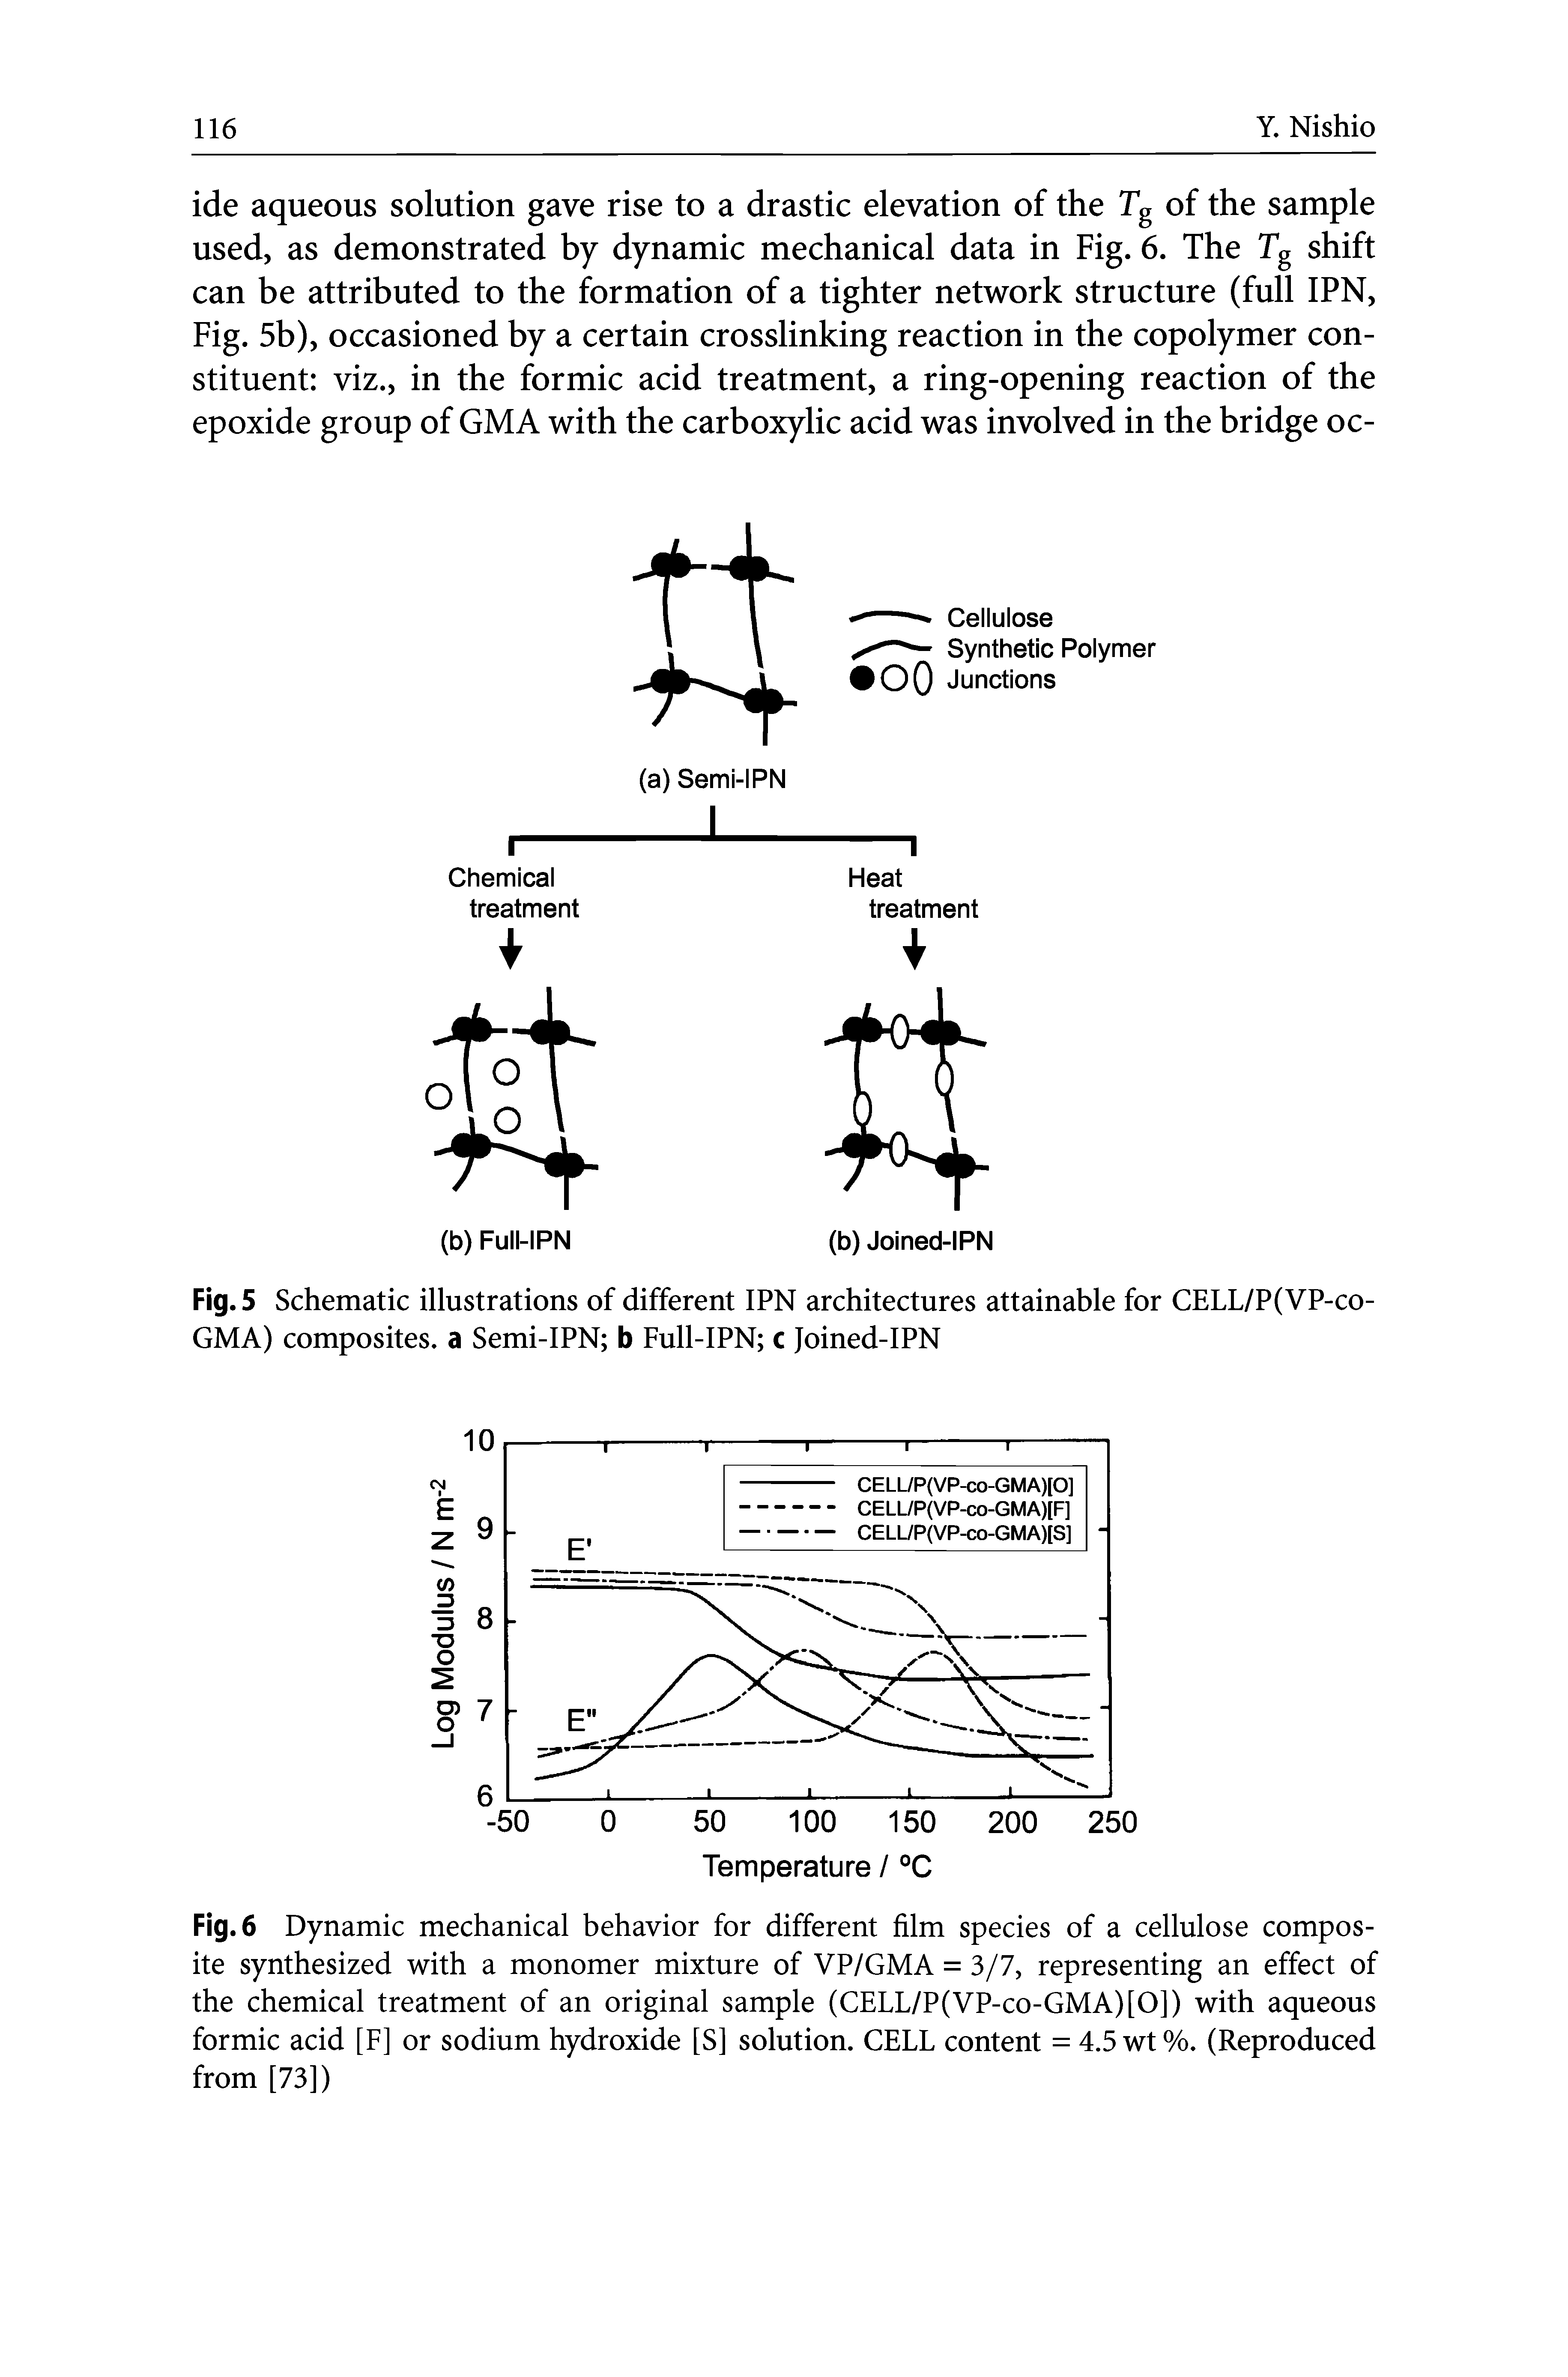 Fig. 6 Dynamic mechanical behavior for different film species of a cellulose composite synthesized with a monomer mixture of VP/GMA = 3/7, representing an effect of the chemical treatment of an original sample (CELL/P(VP-co-GMA)[0]) with aqueous formic acid [F] or sodium hydroxide [S] solution. CELL content = 4.5 wt%. (Reproduced from [73])...